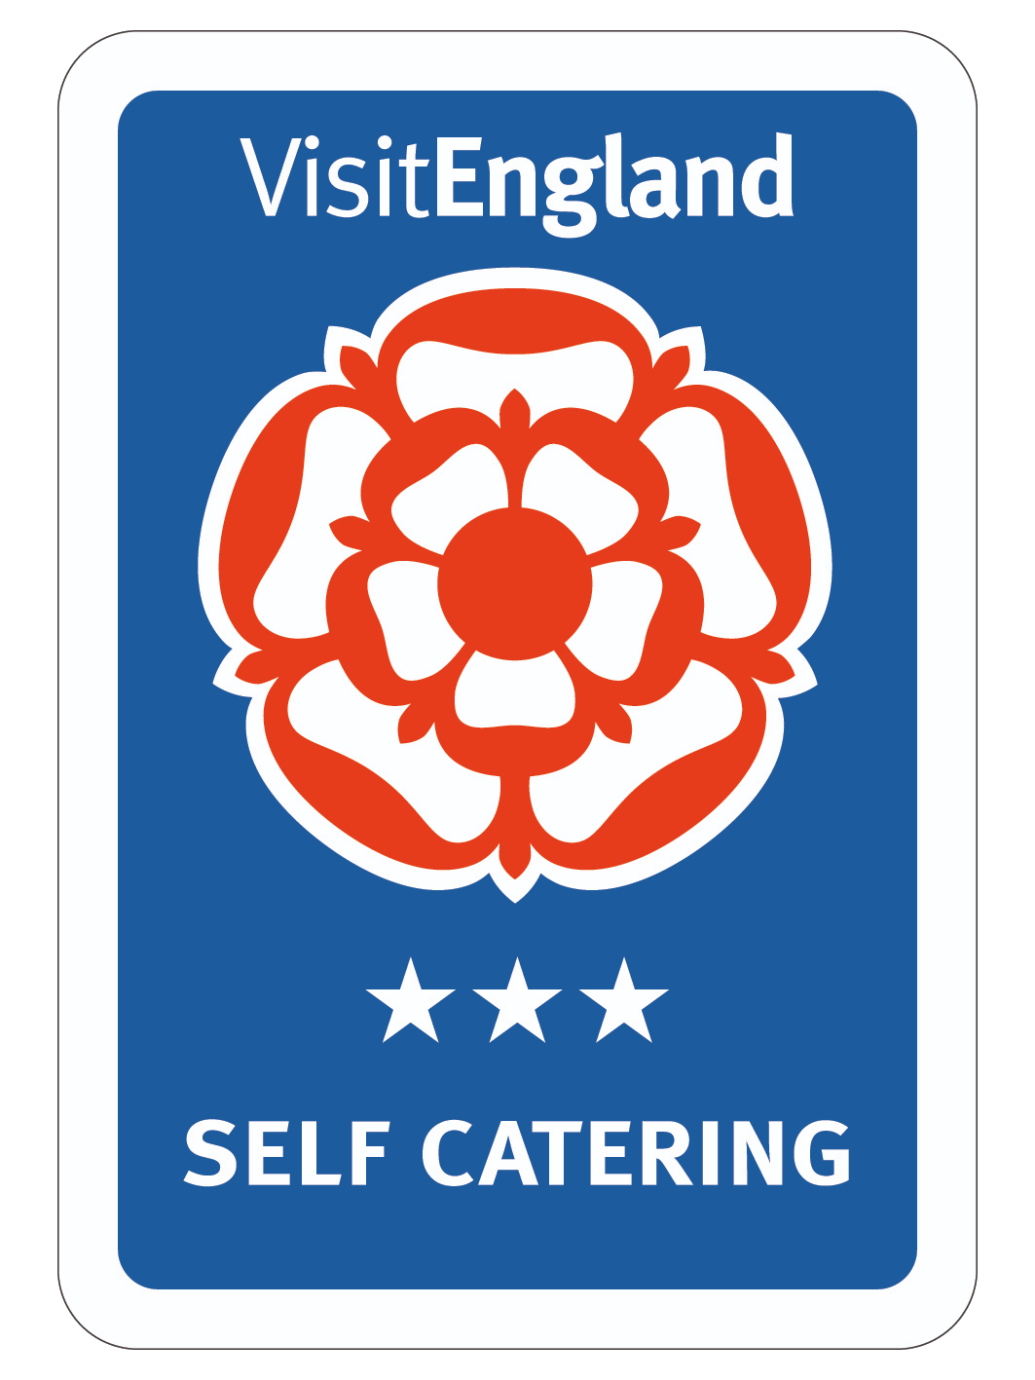 3st-Self-Catering-logo